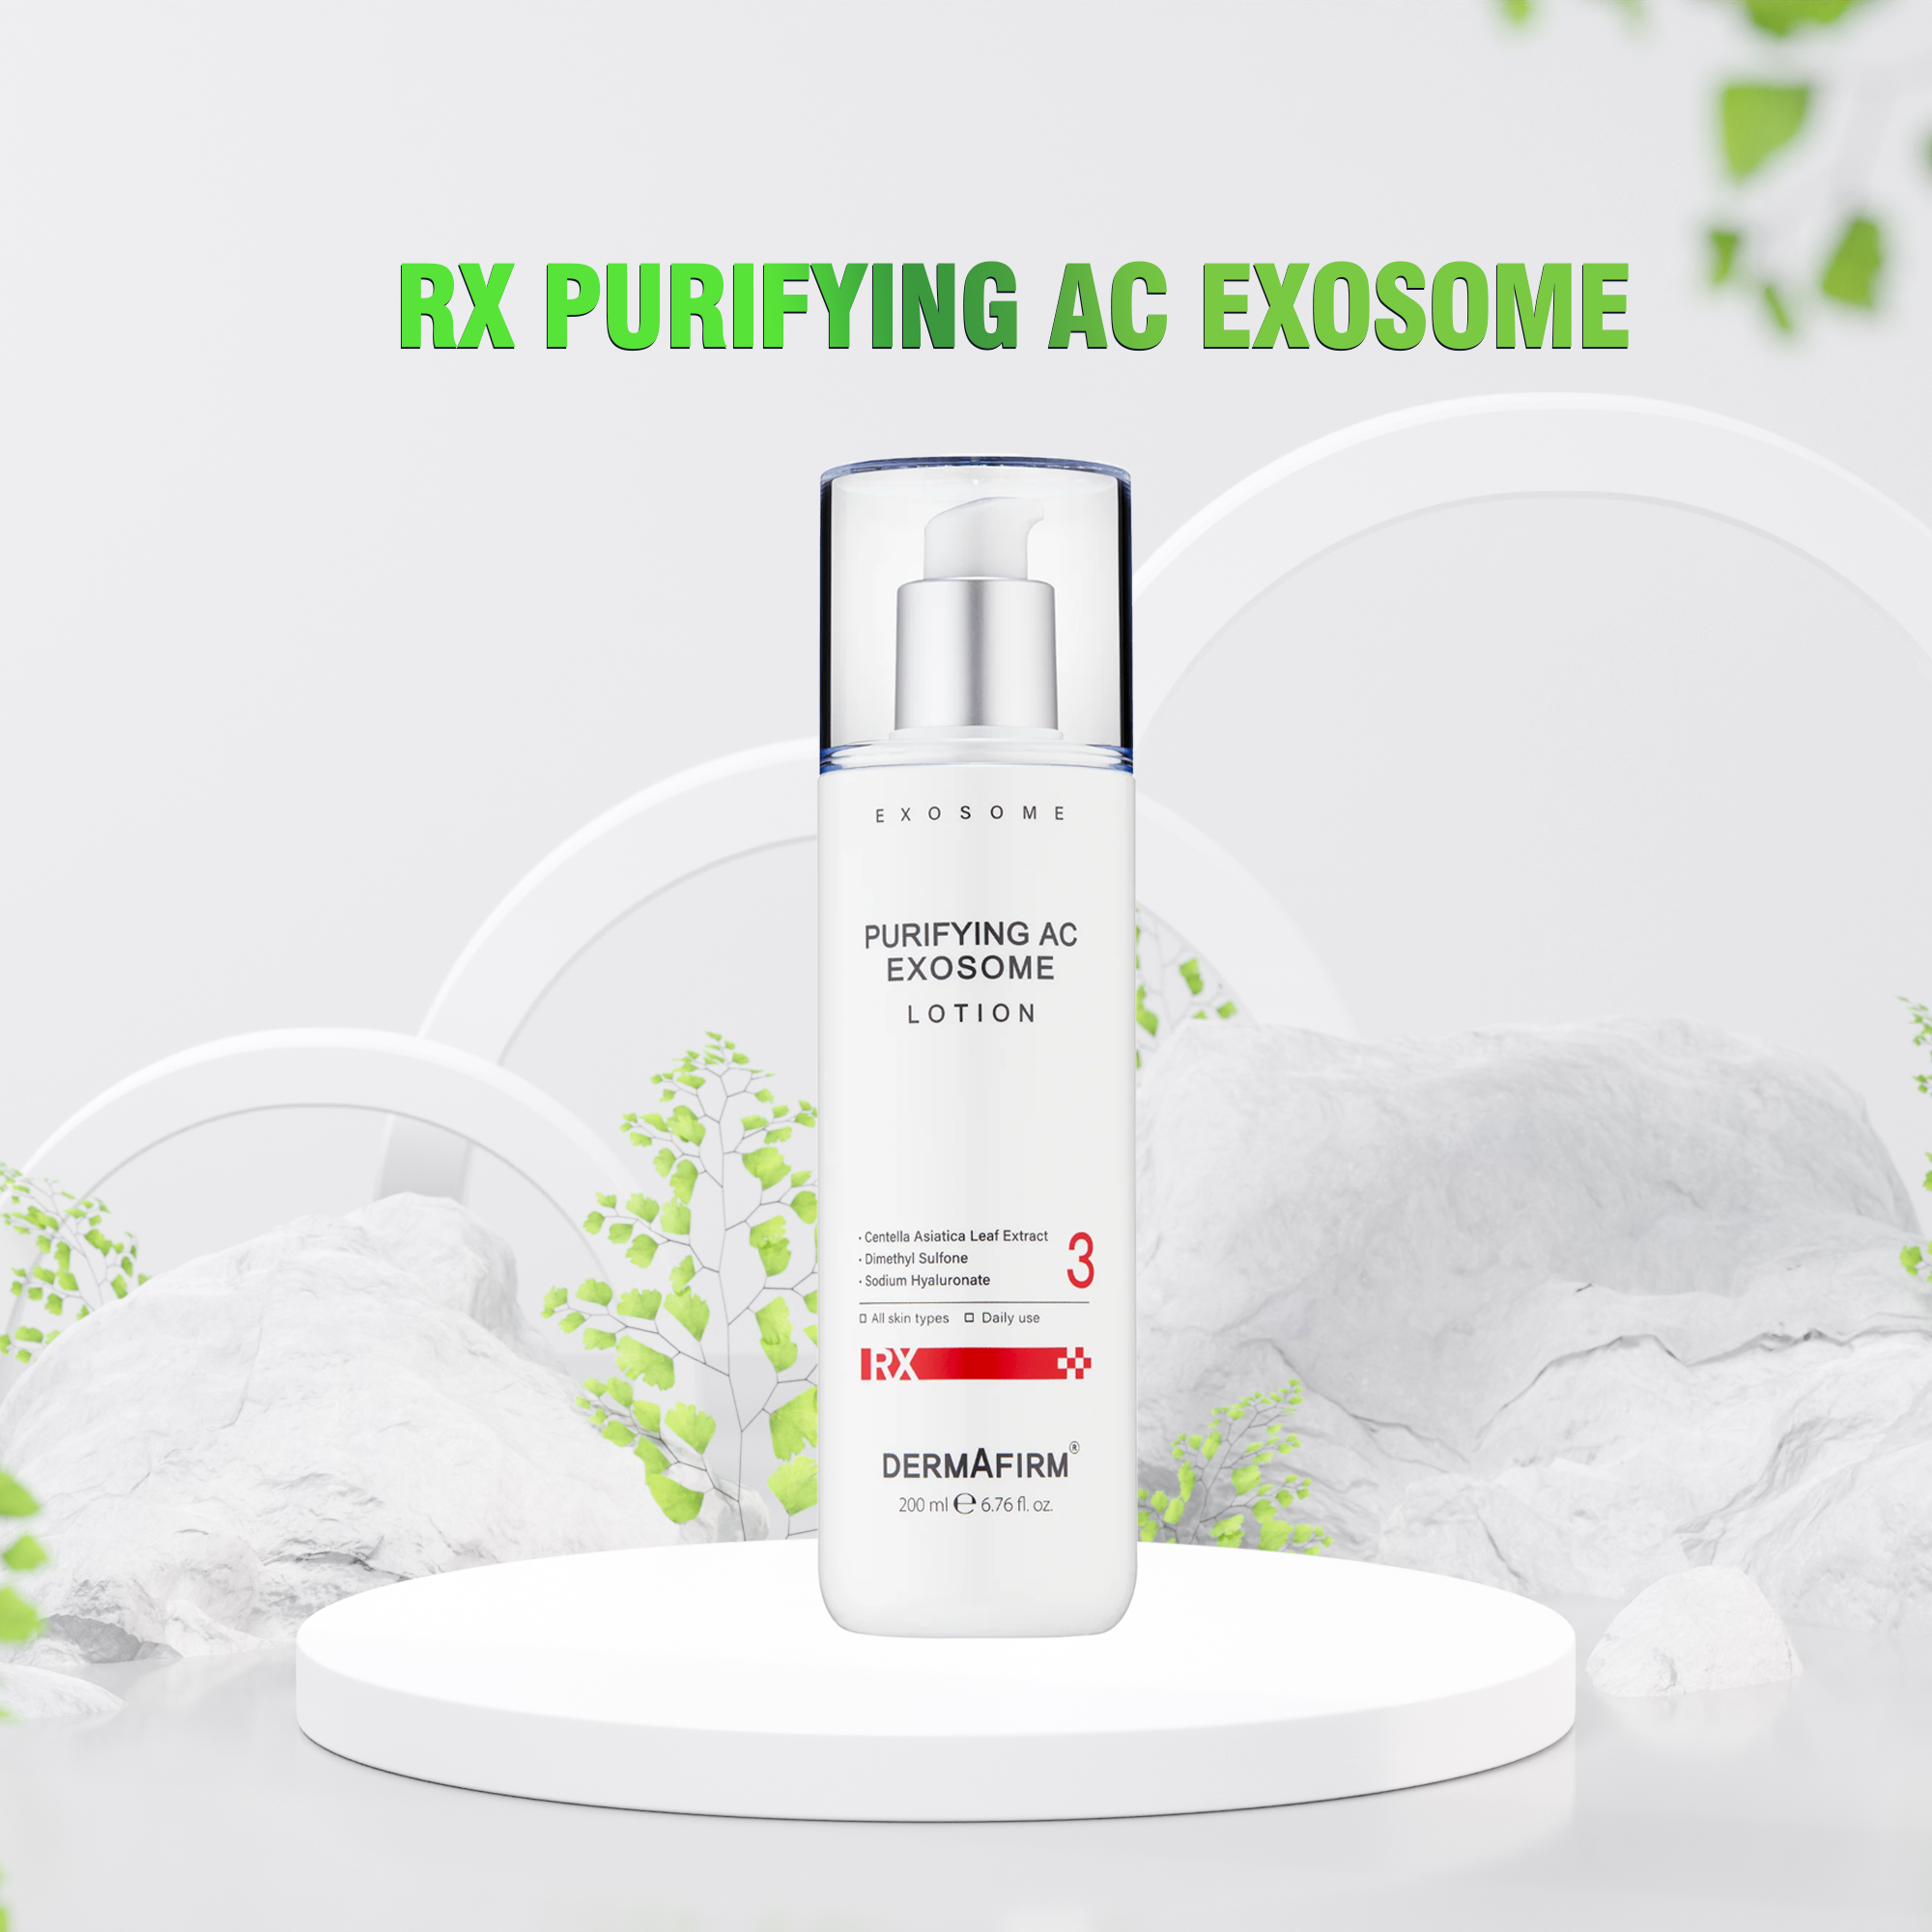 RX Purifying AC Exosome Lotion - 200ml